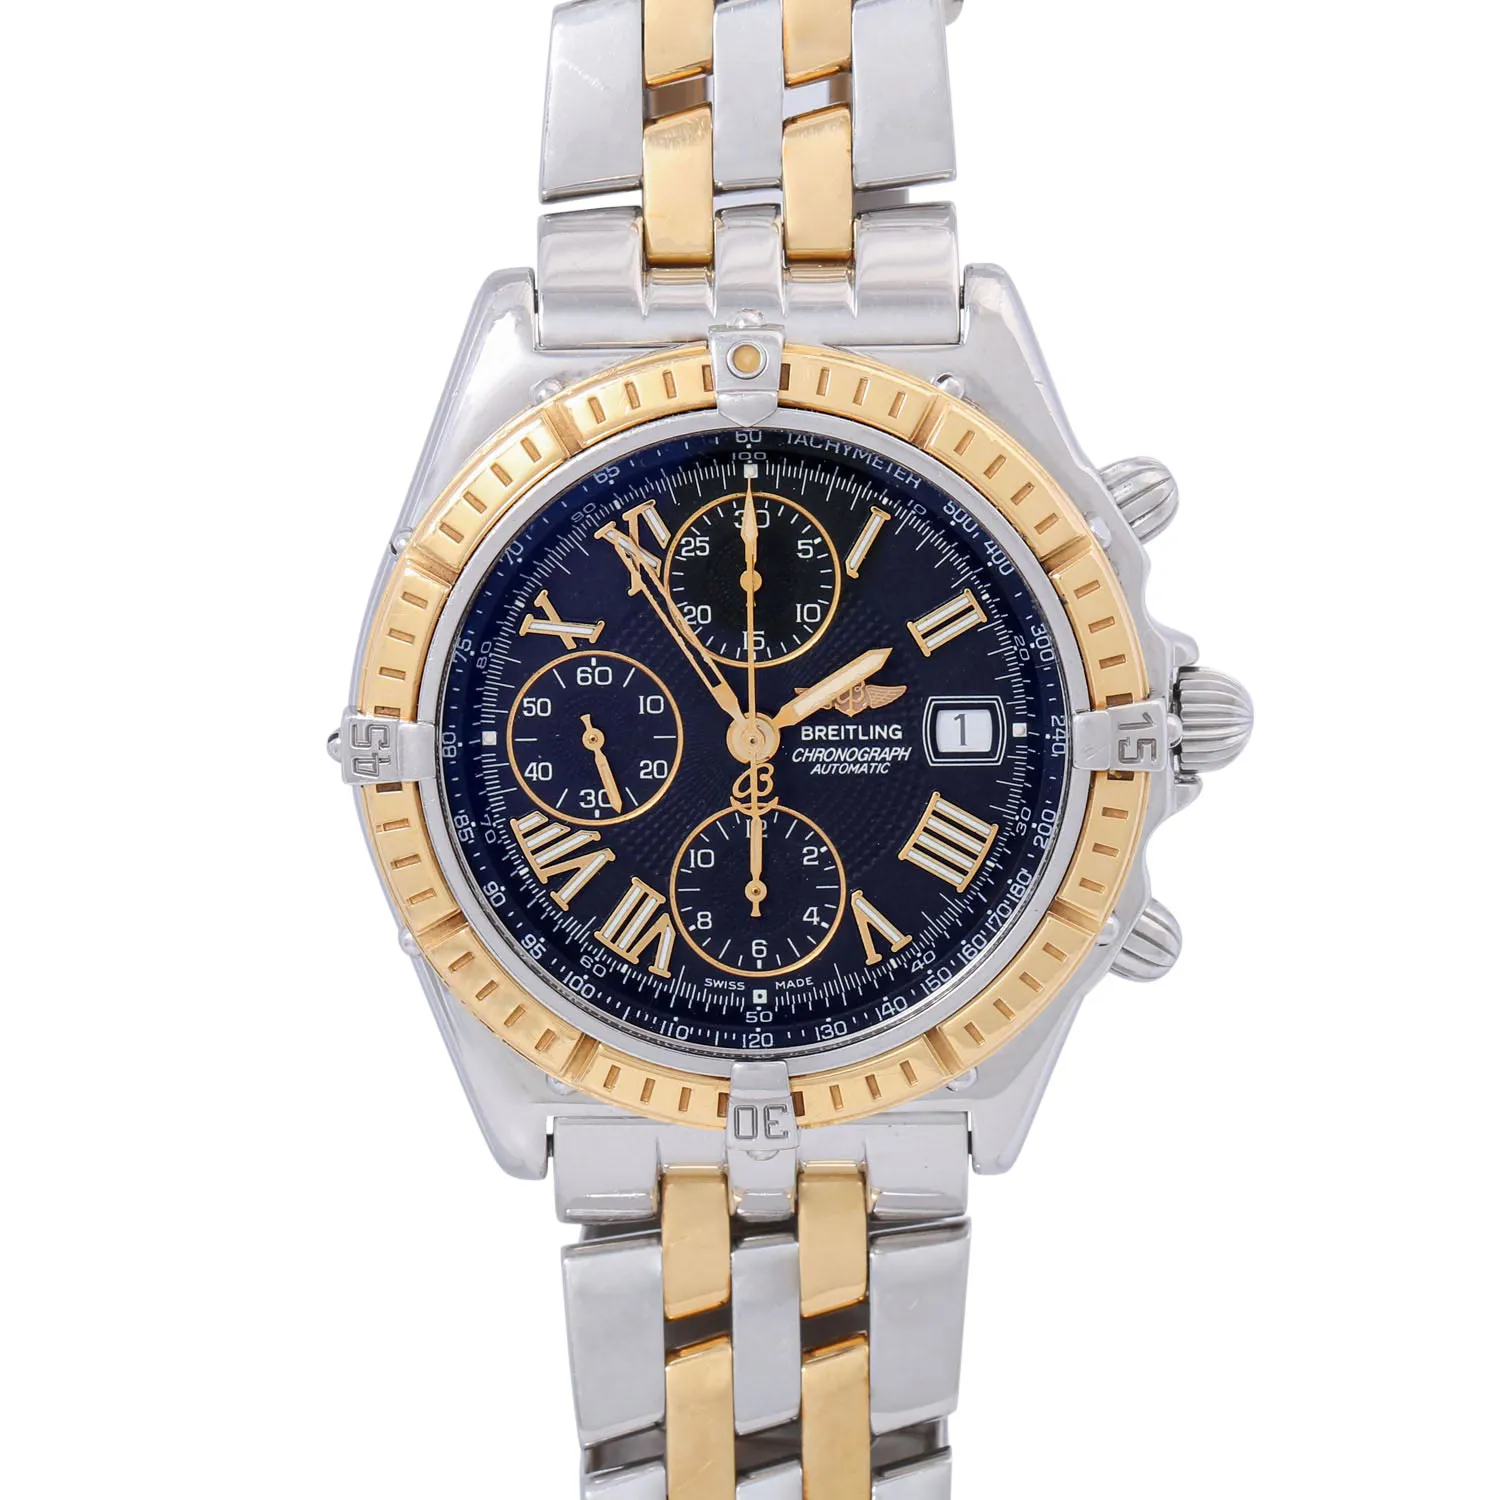 Breitling Navitimer D13055 42mm Yellow gold and stainless steel Black